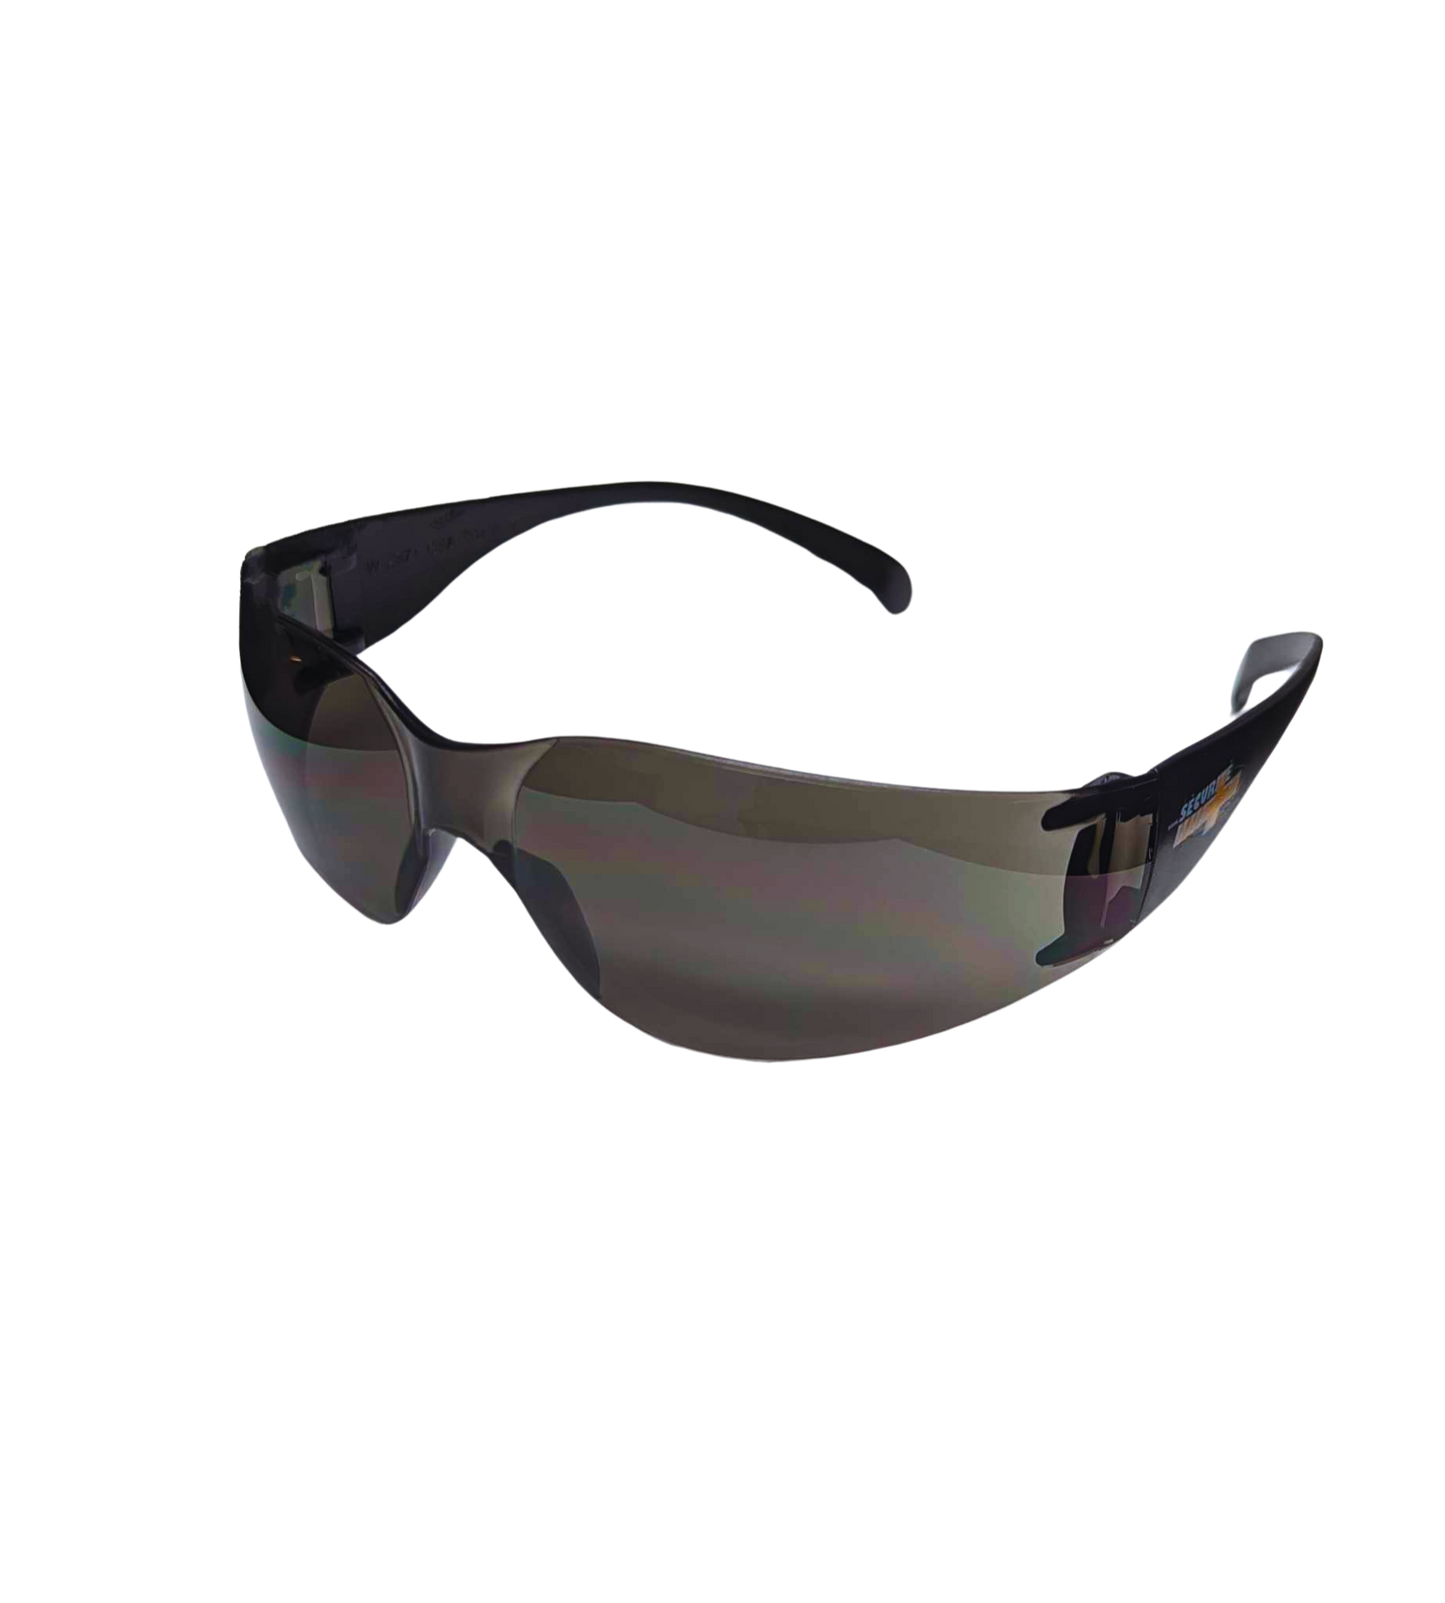 SAFETY GLASSES - SG-CLEAR/SG-SMOKE